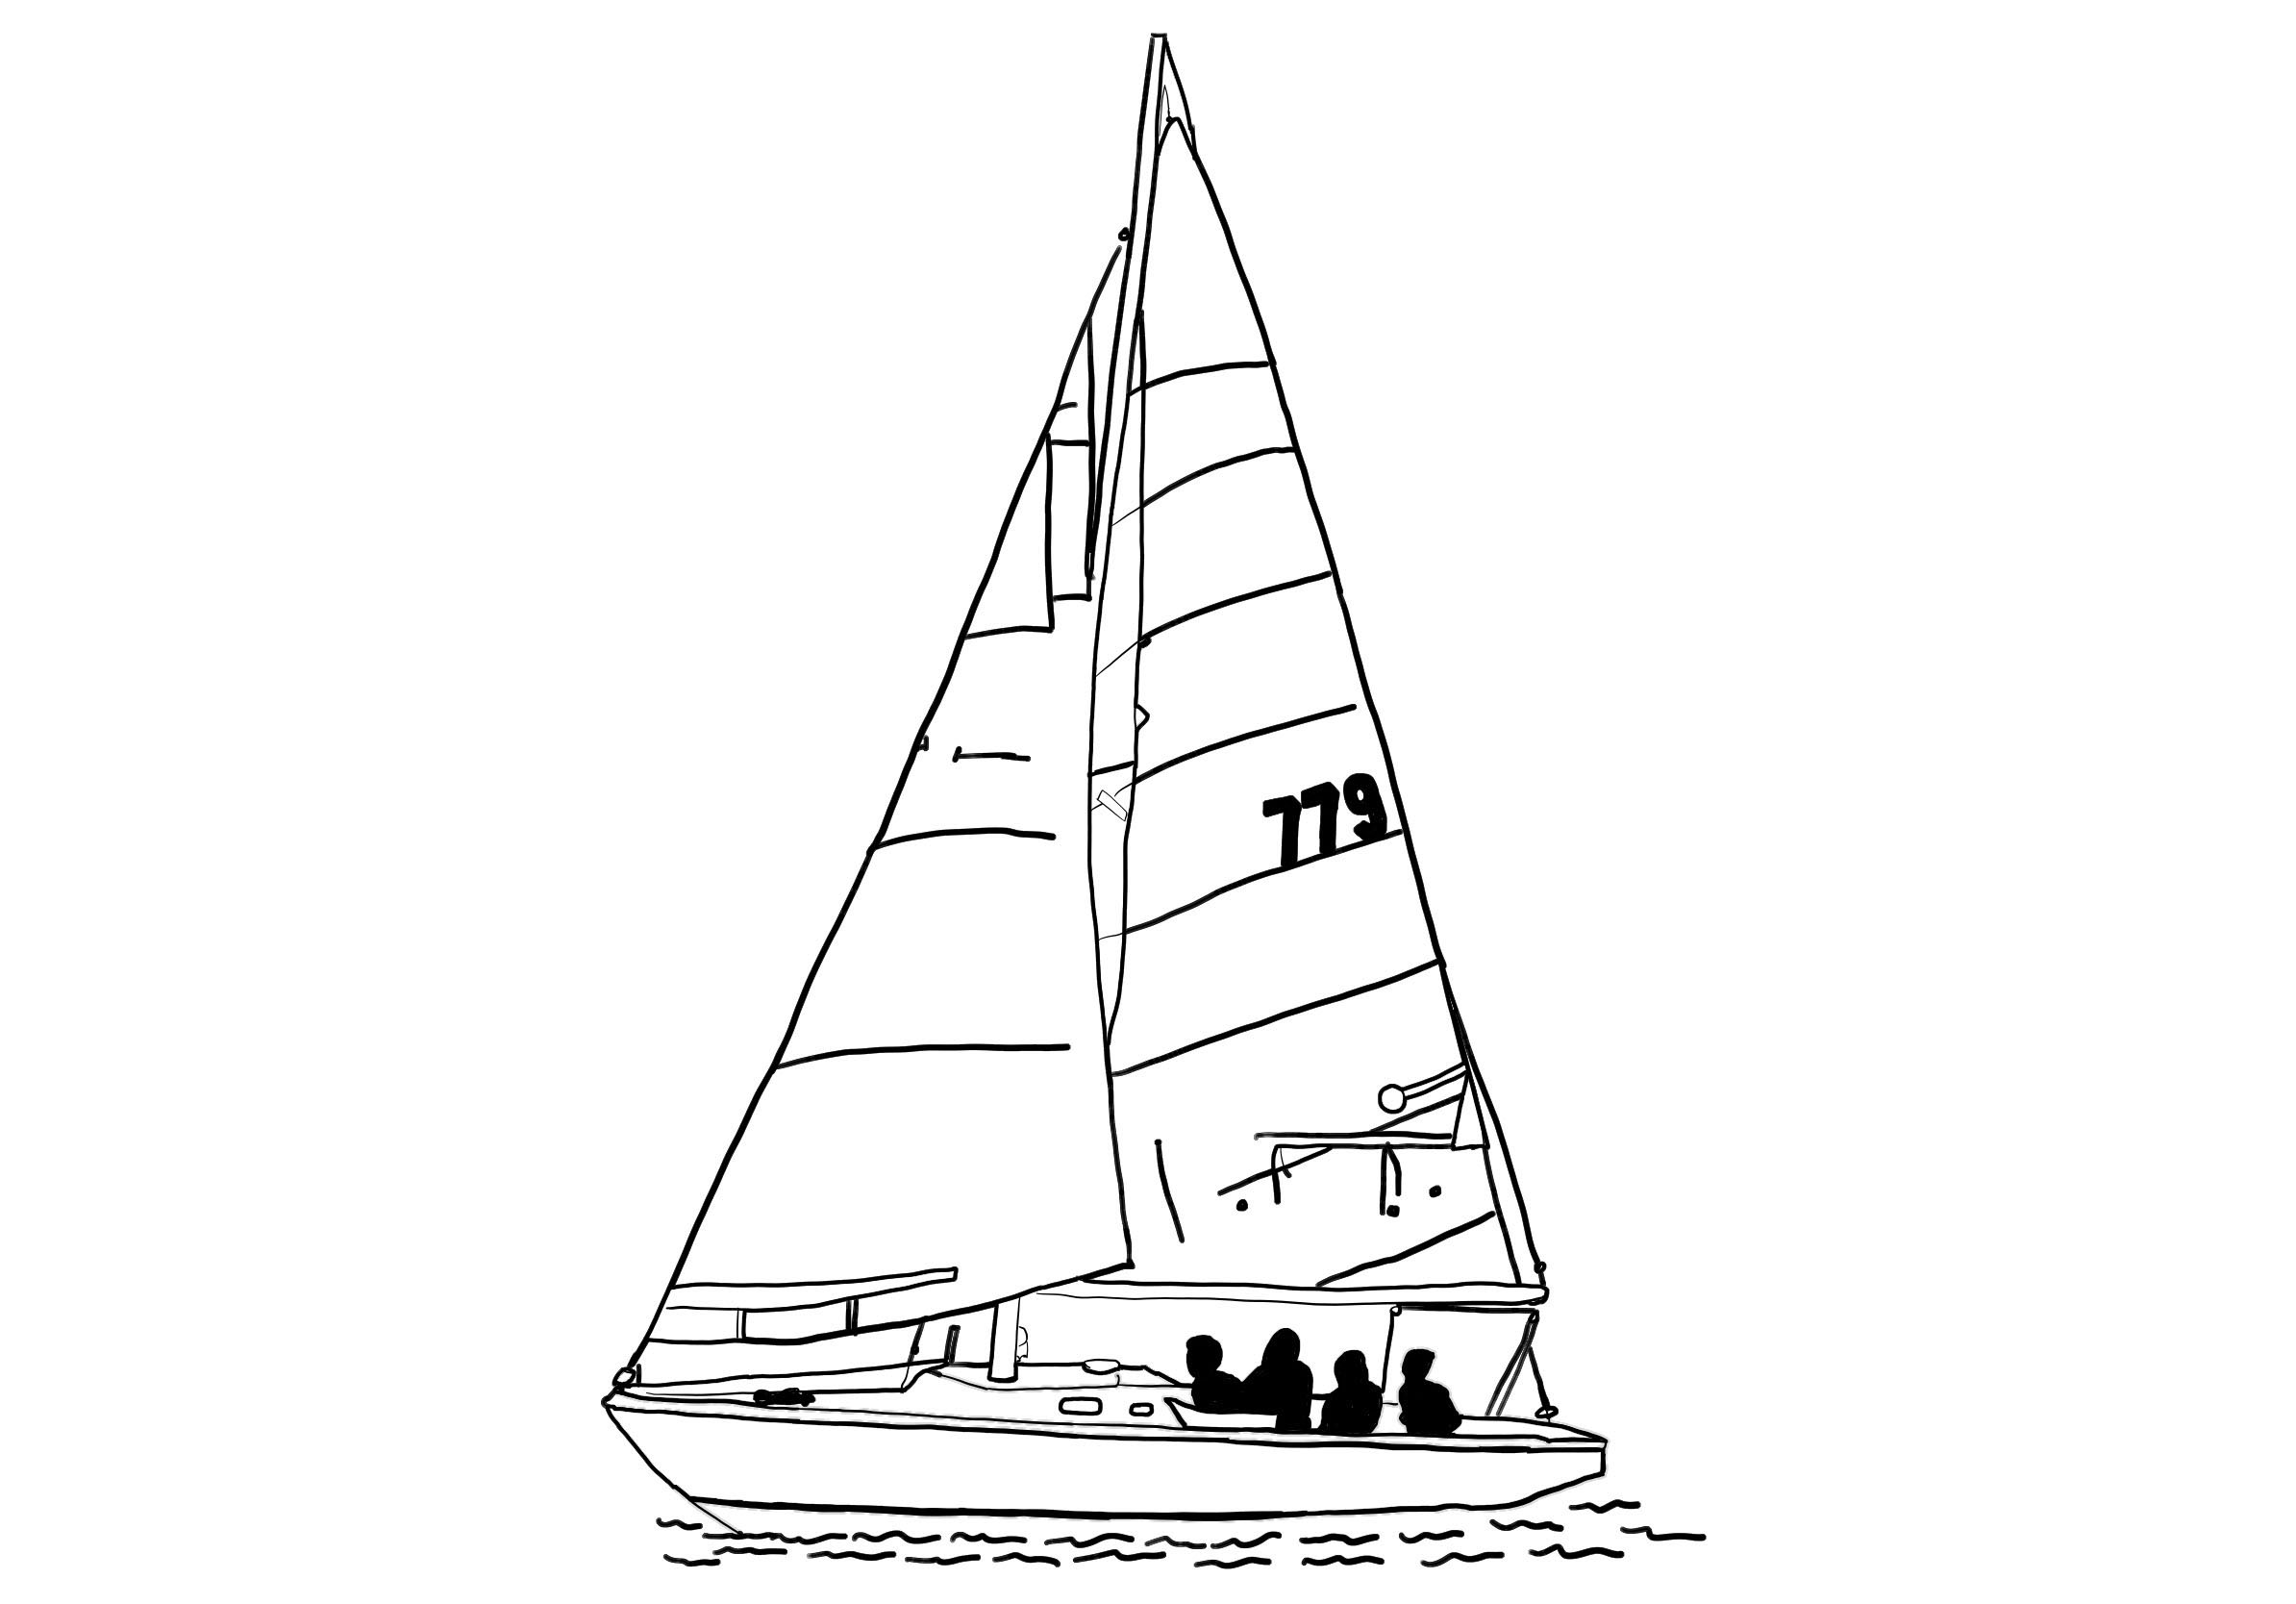 Drawing of Boat